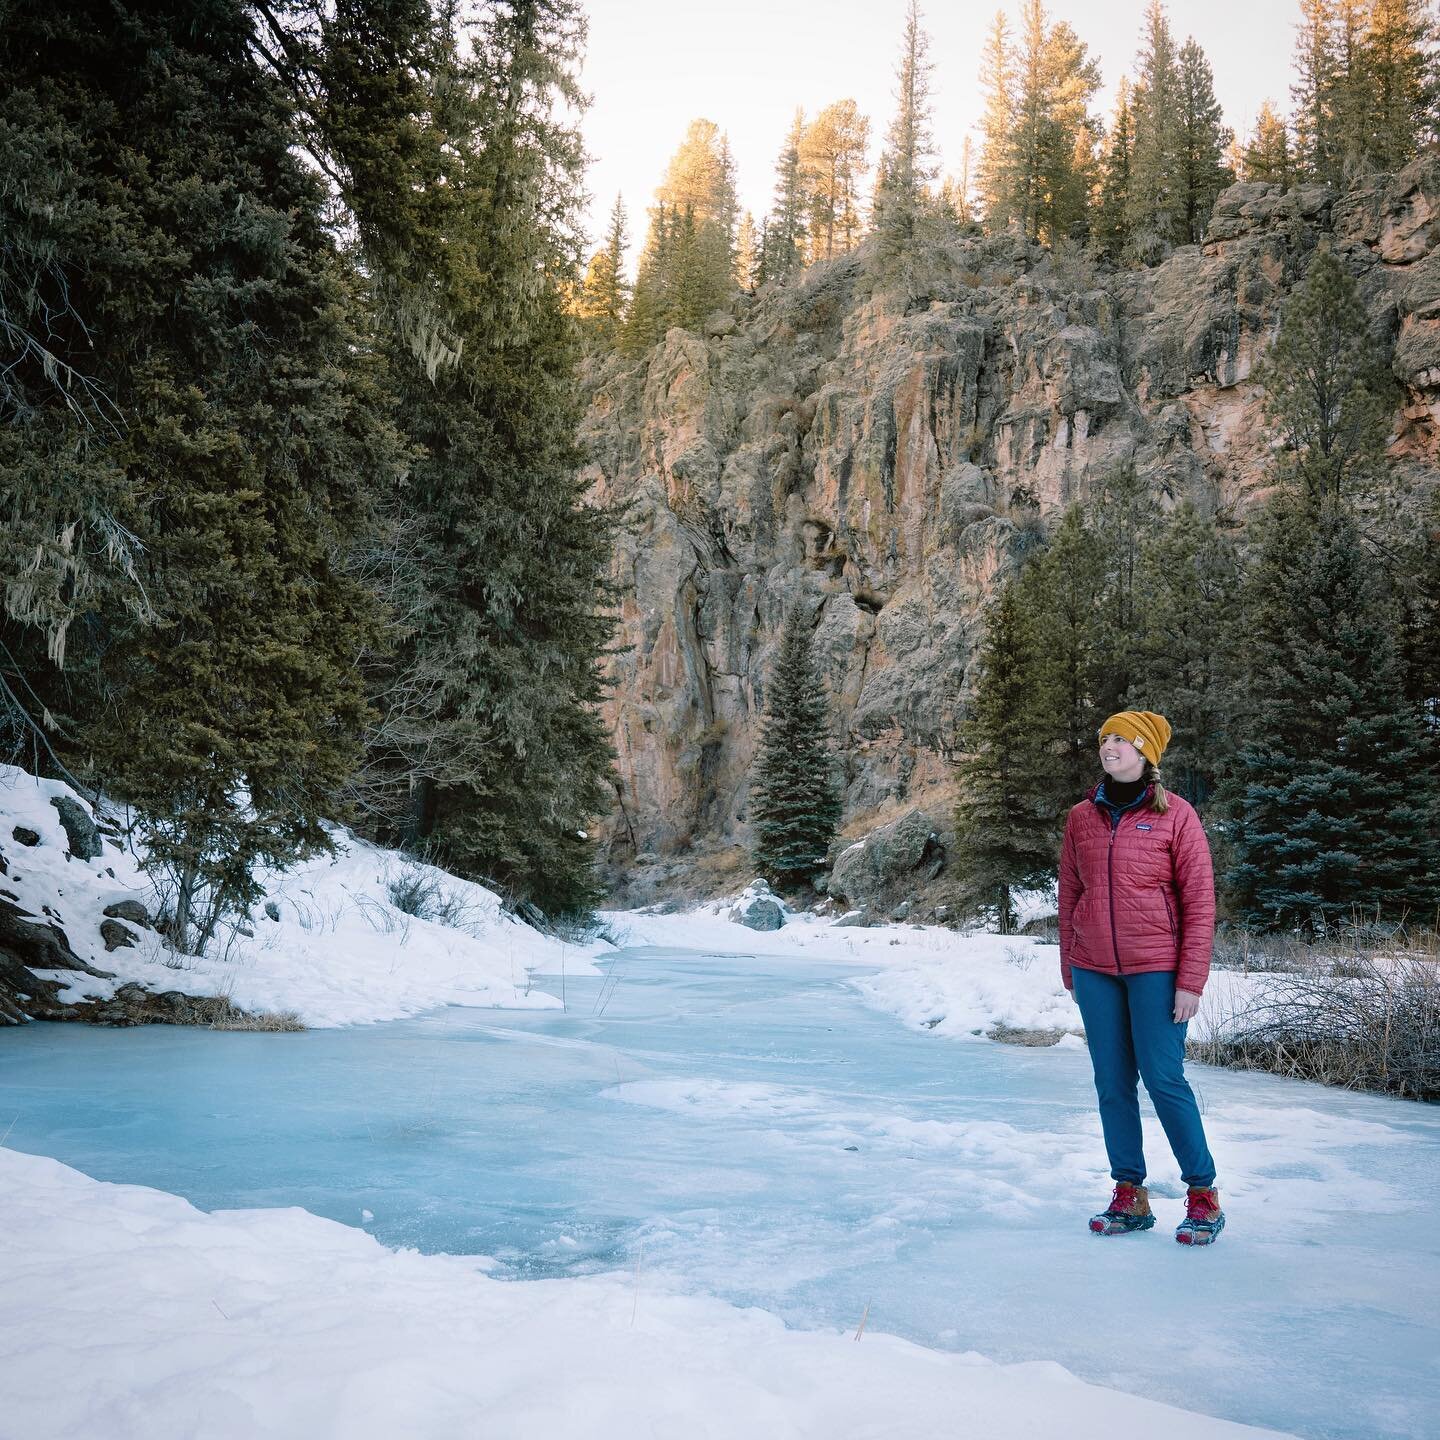 A chilly solo hike close to home! ❄️ 

I don't often hike alone unless it's one I'm very familiar with (I've probably done this one 10+ times). I'm a very clumsy person and I know it's not safe to solo hike in unfamiliar places. While on this hike, I